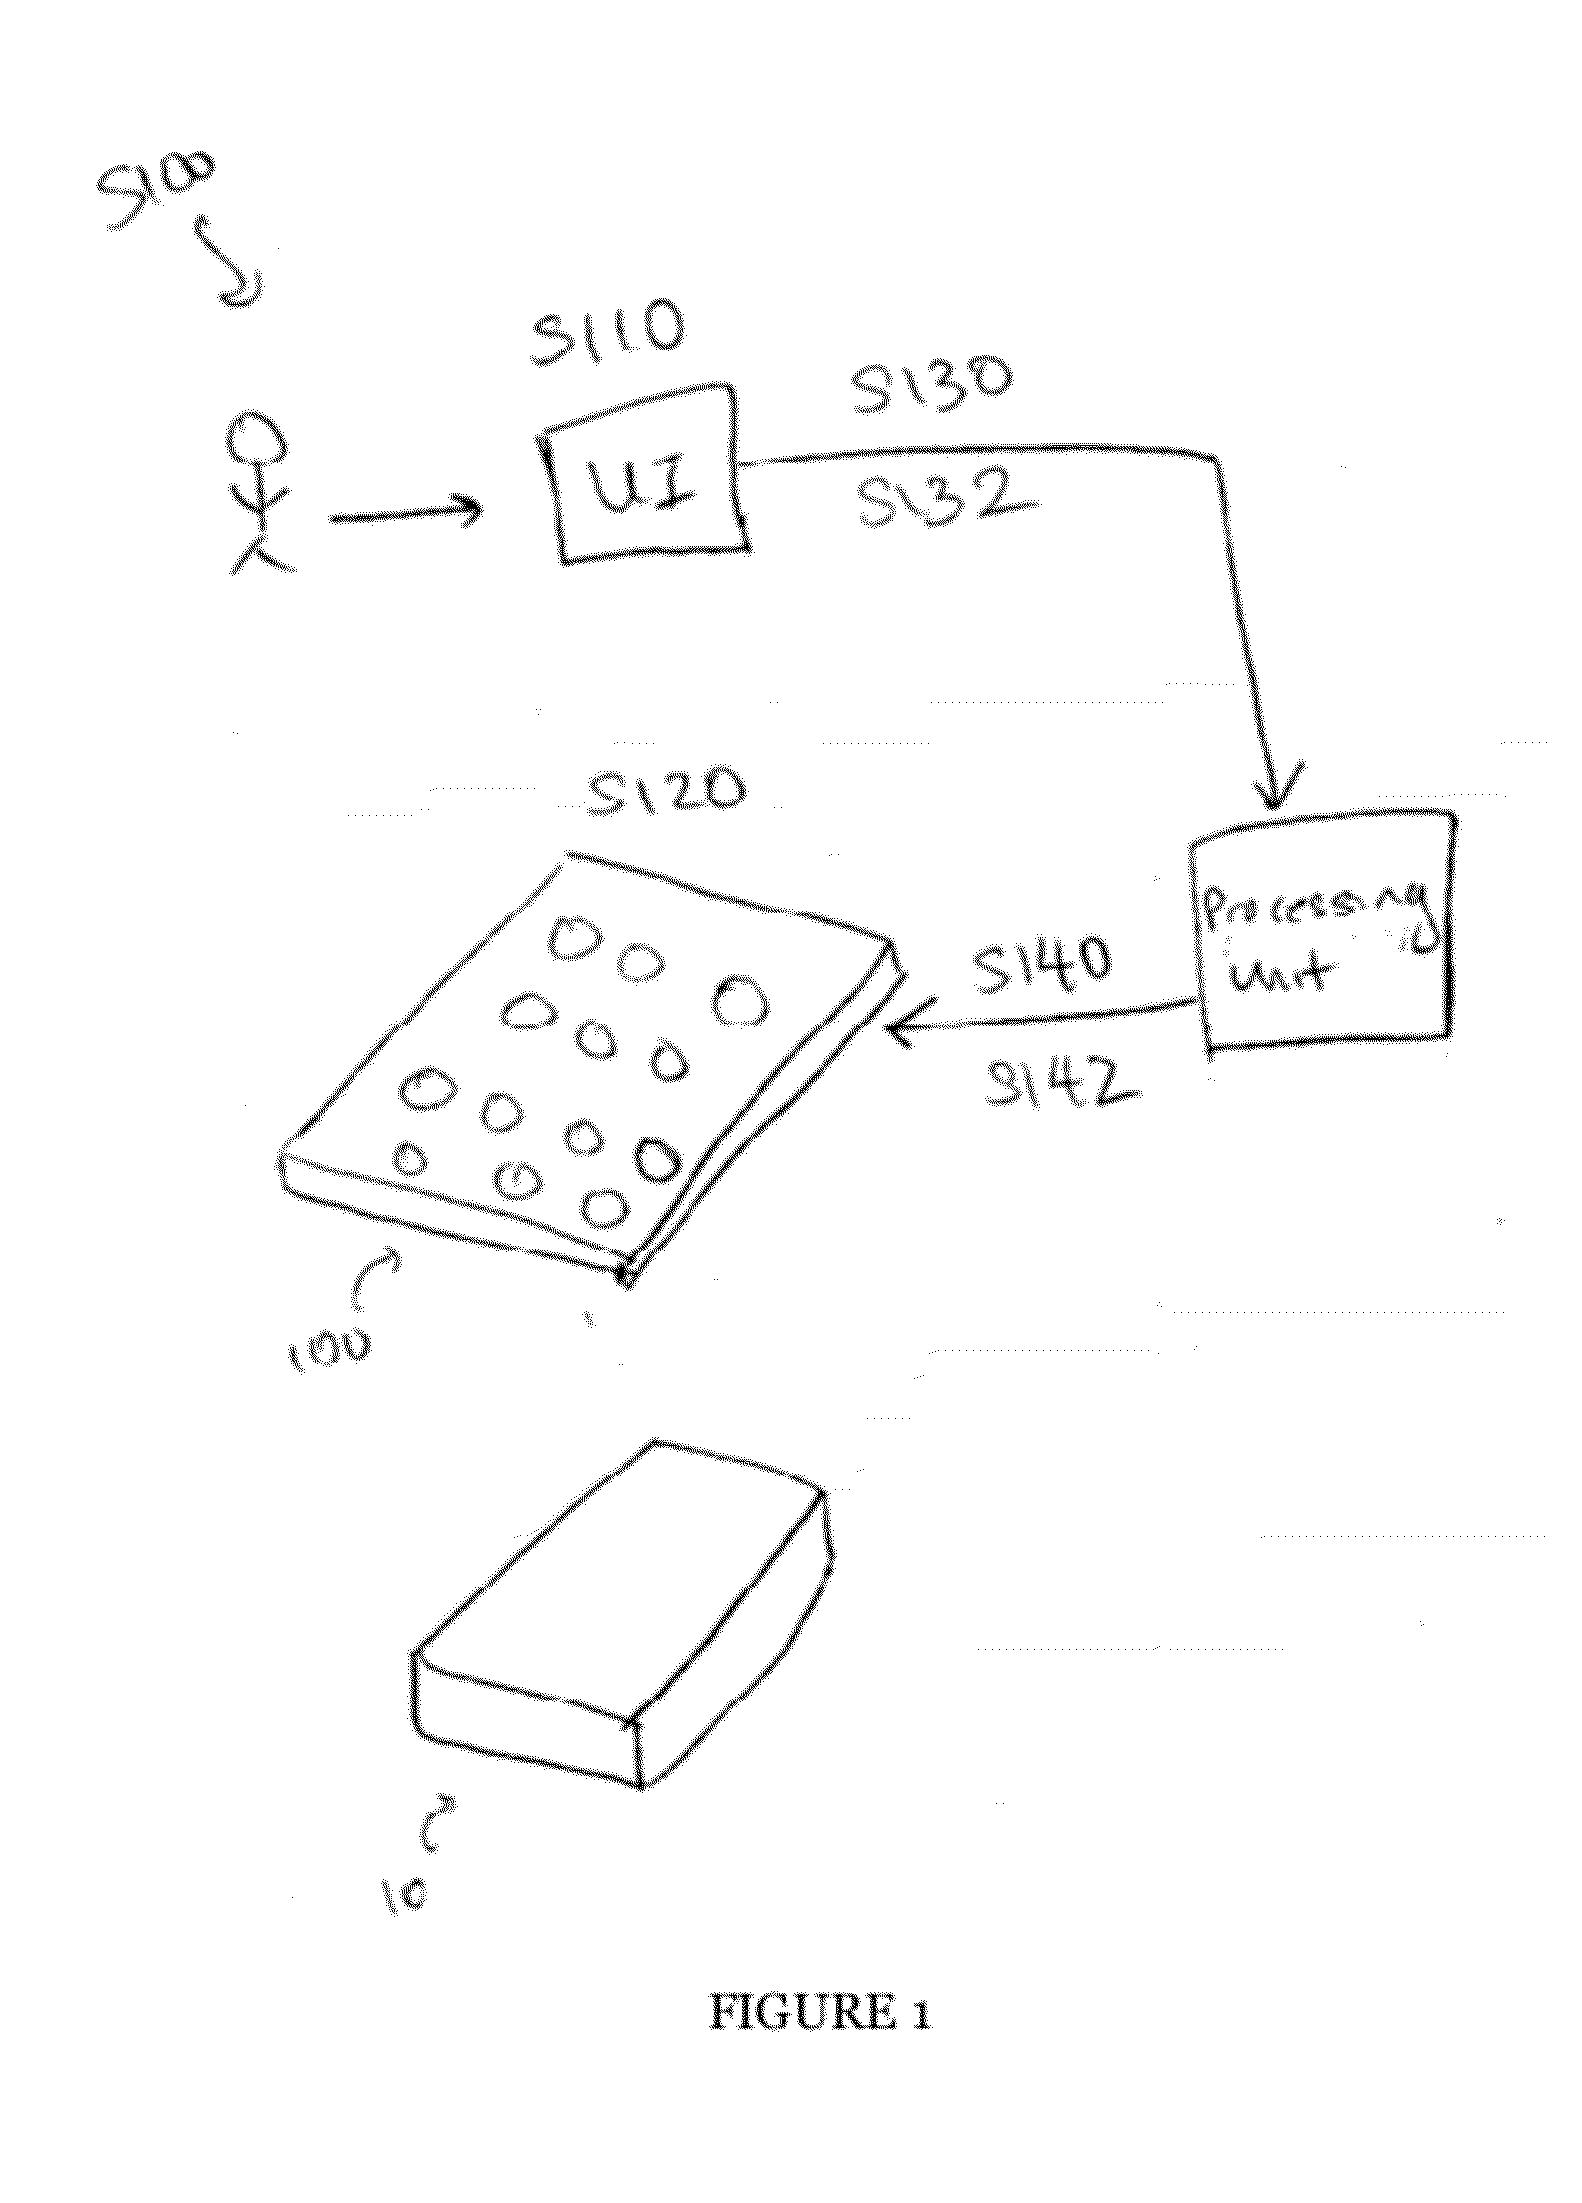 Method for adjusting the user interface of a device